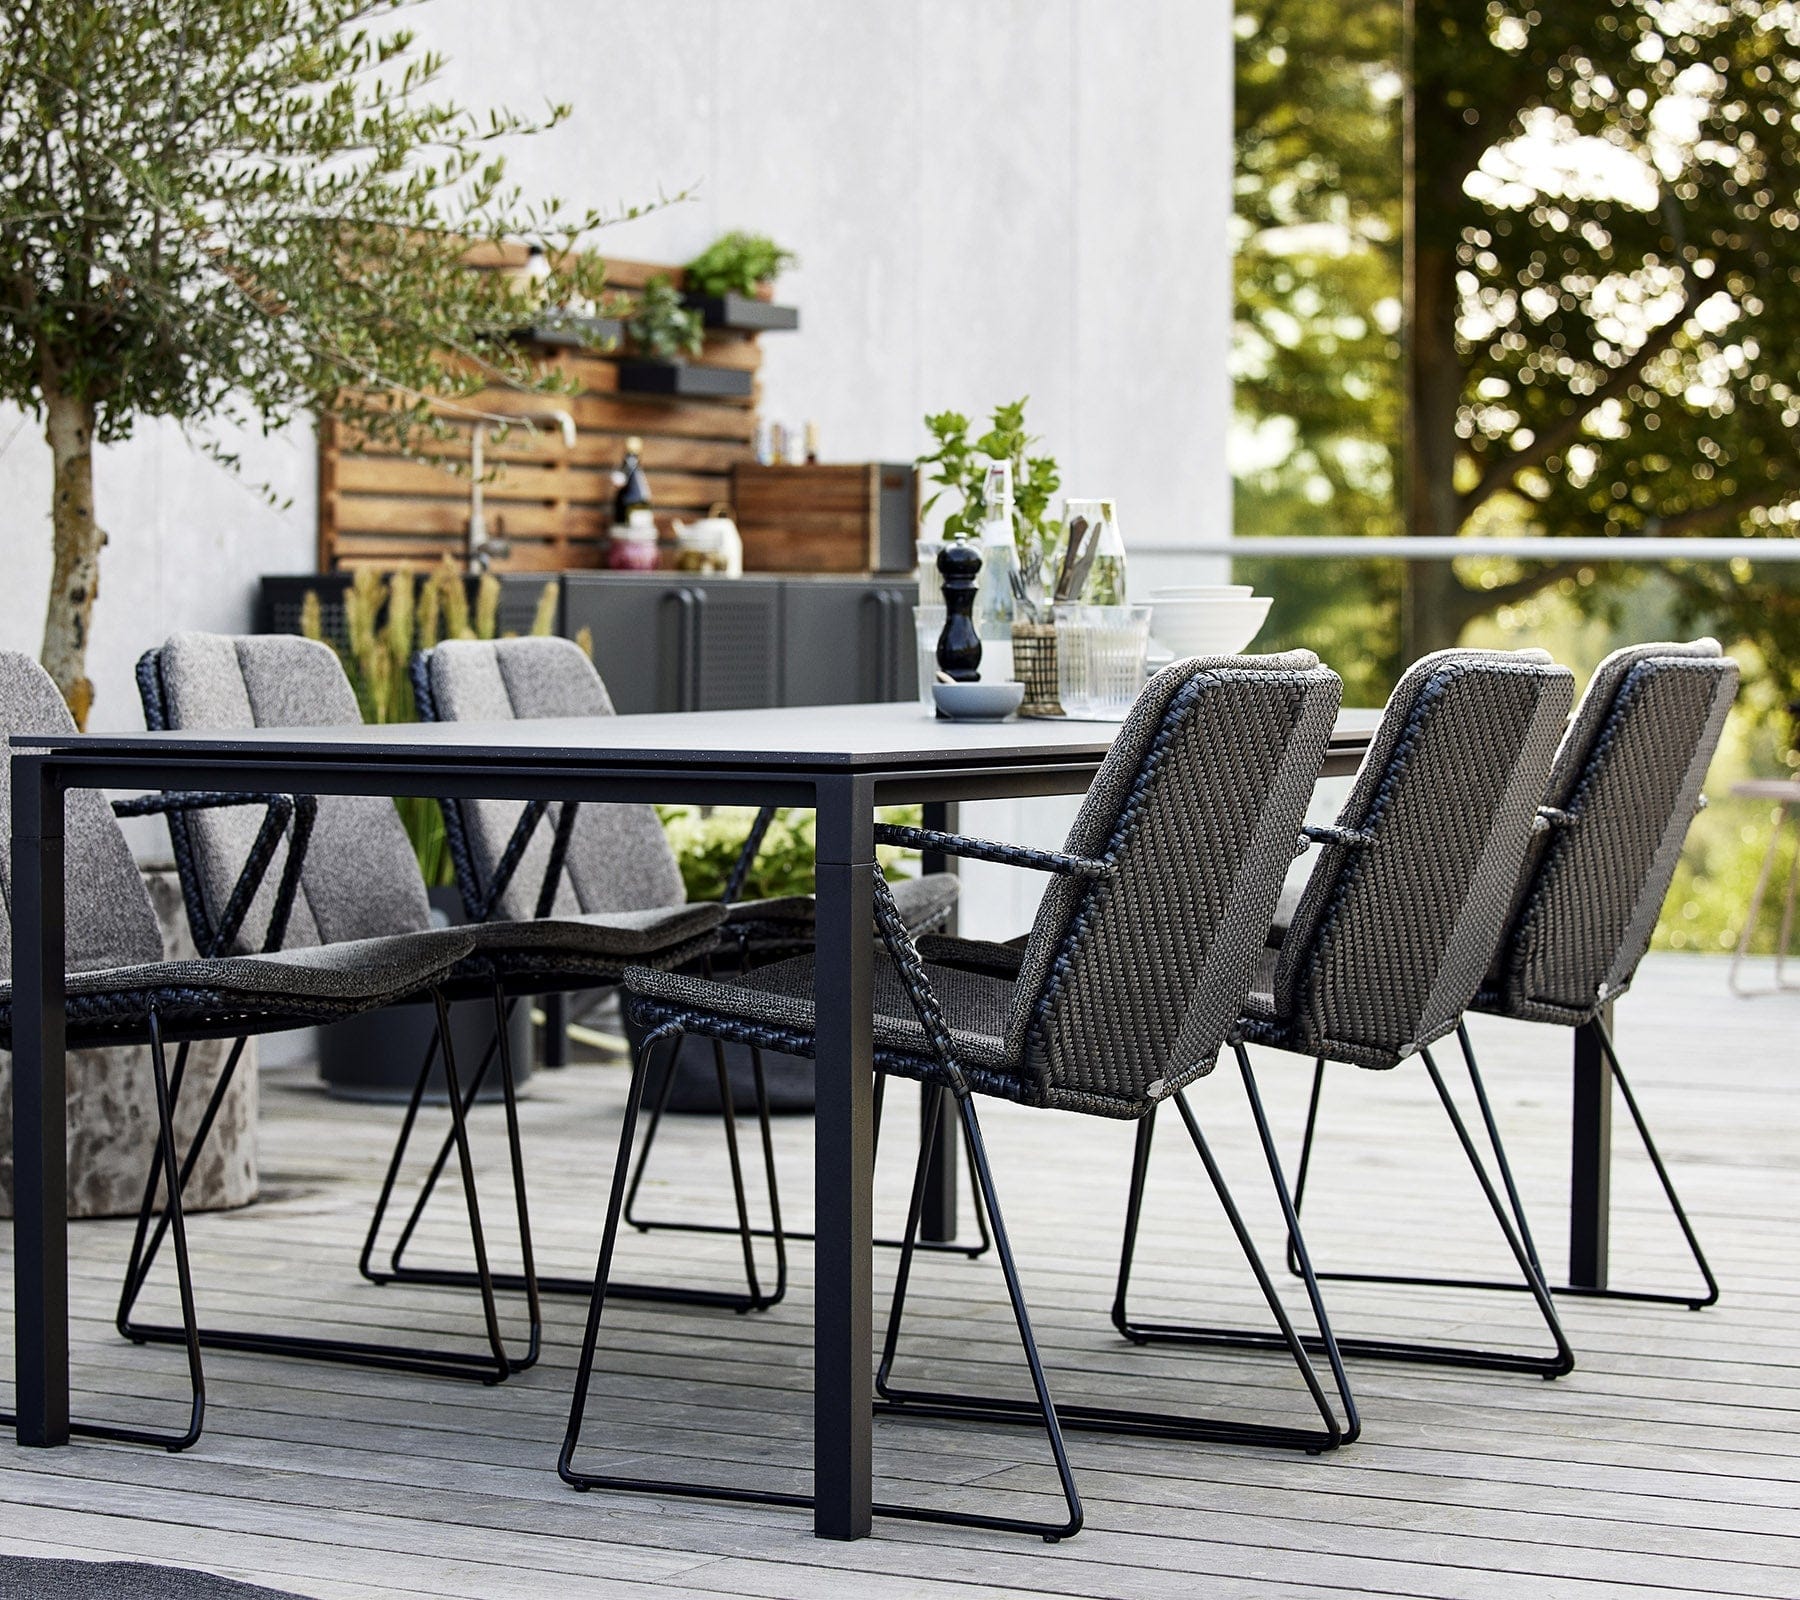 Boxhill's Vision black outdoor dining chair with dark grey cushion and dark grey outdoor dining table placed on balcony